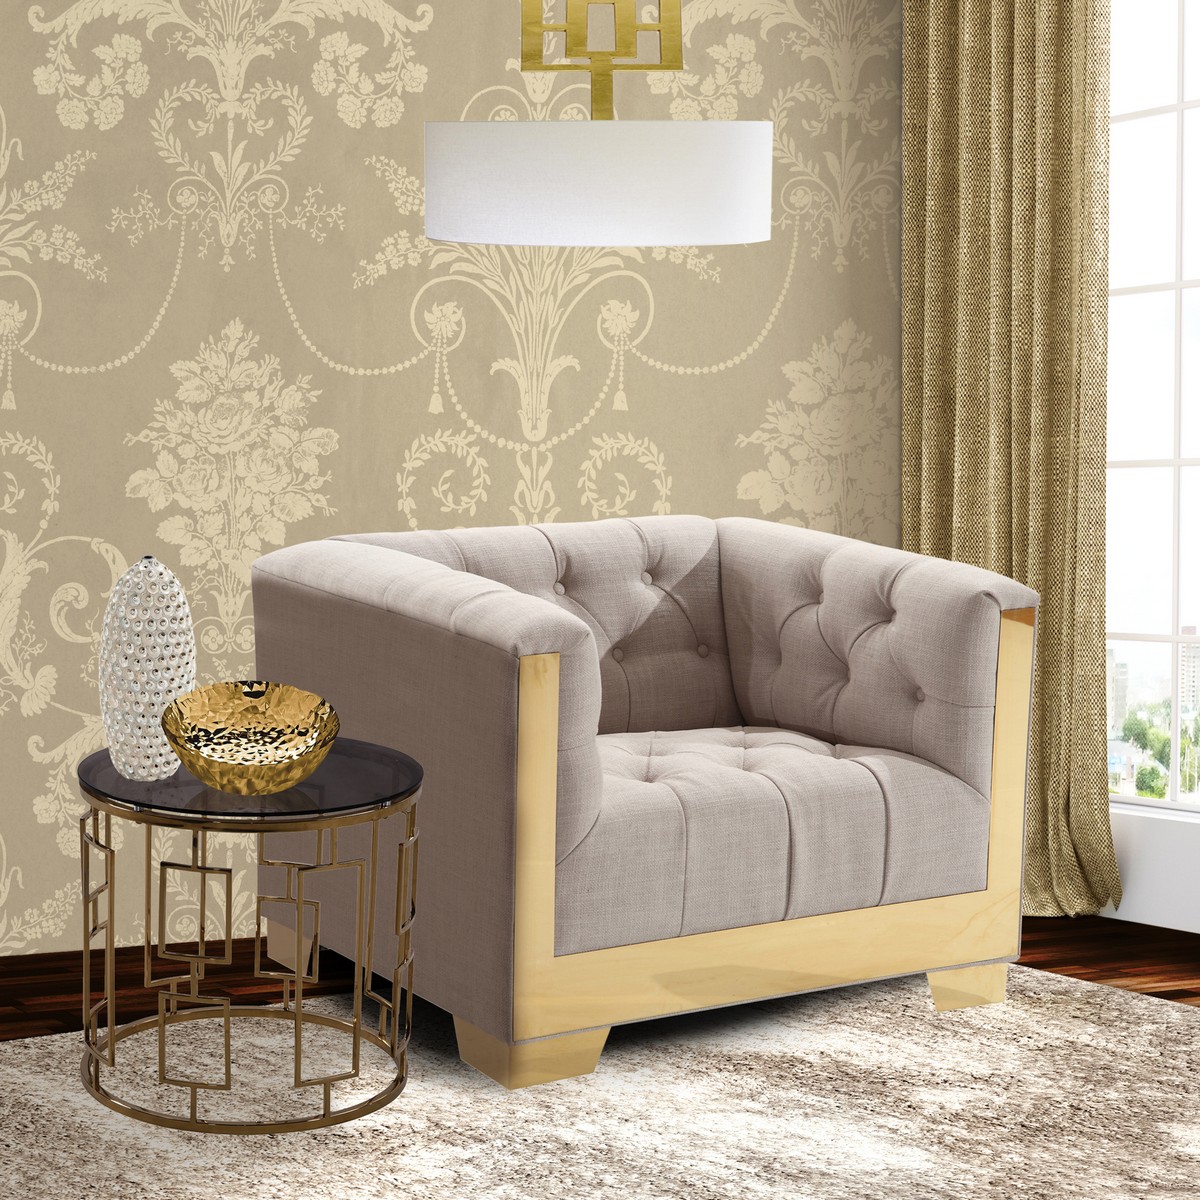 Armen Living Zinc Contemporary Chair In Taupe Tweed and Shiny Gold Finish